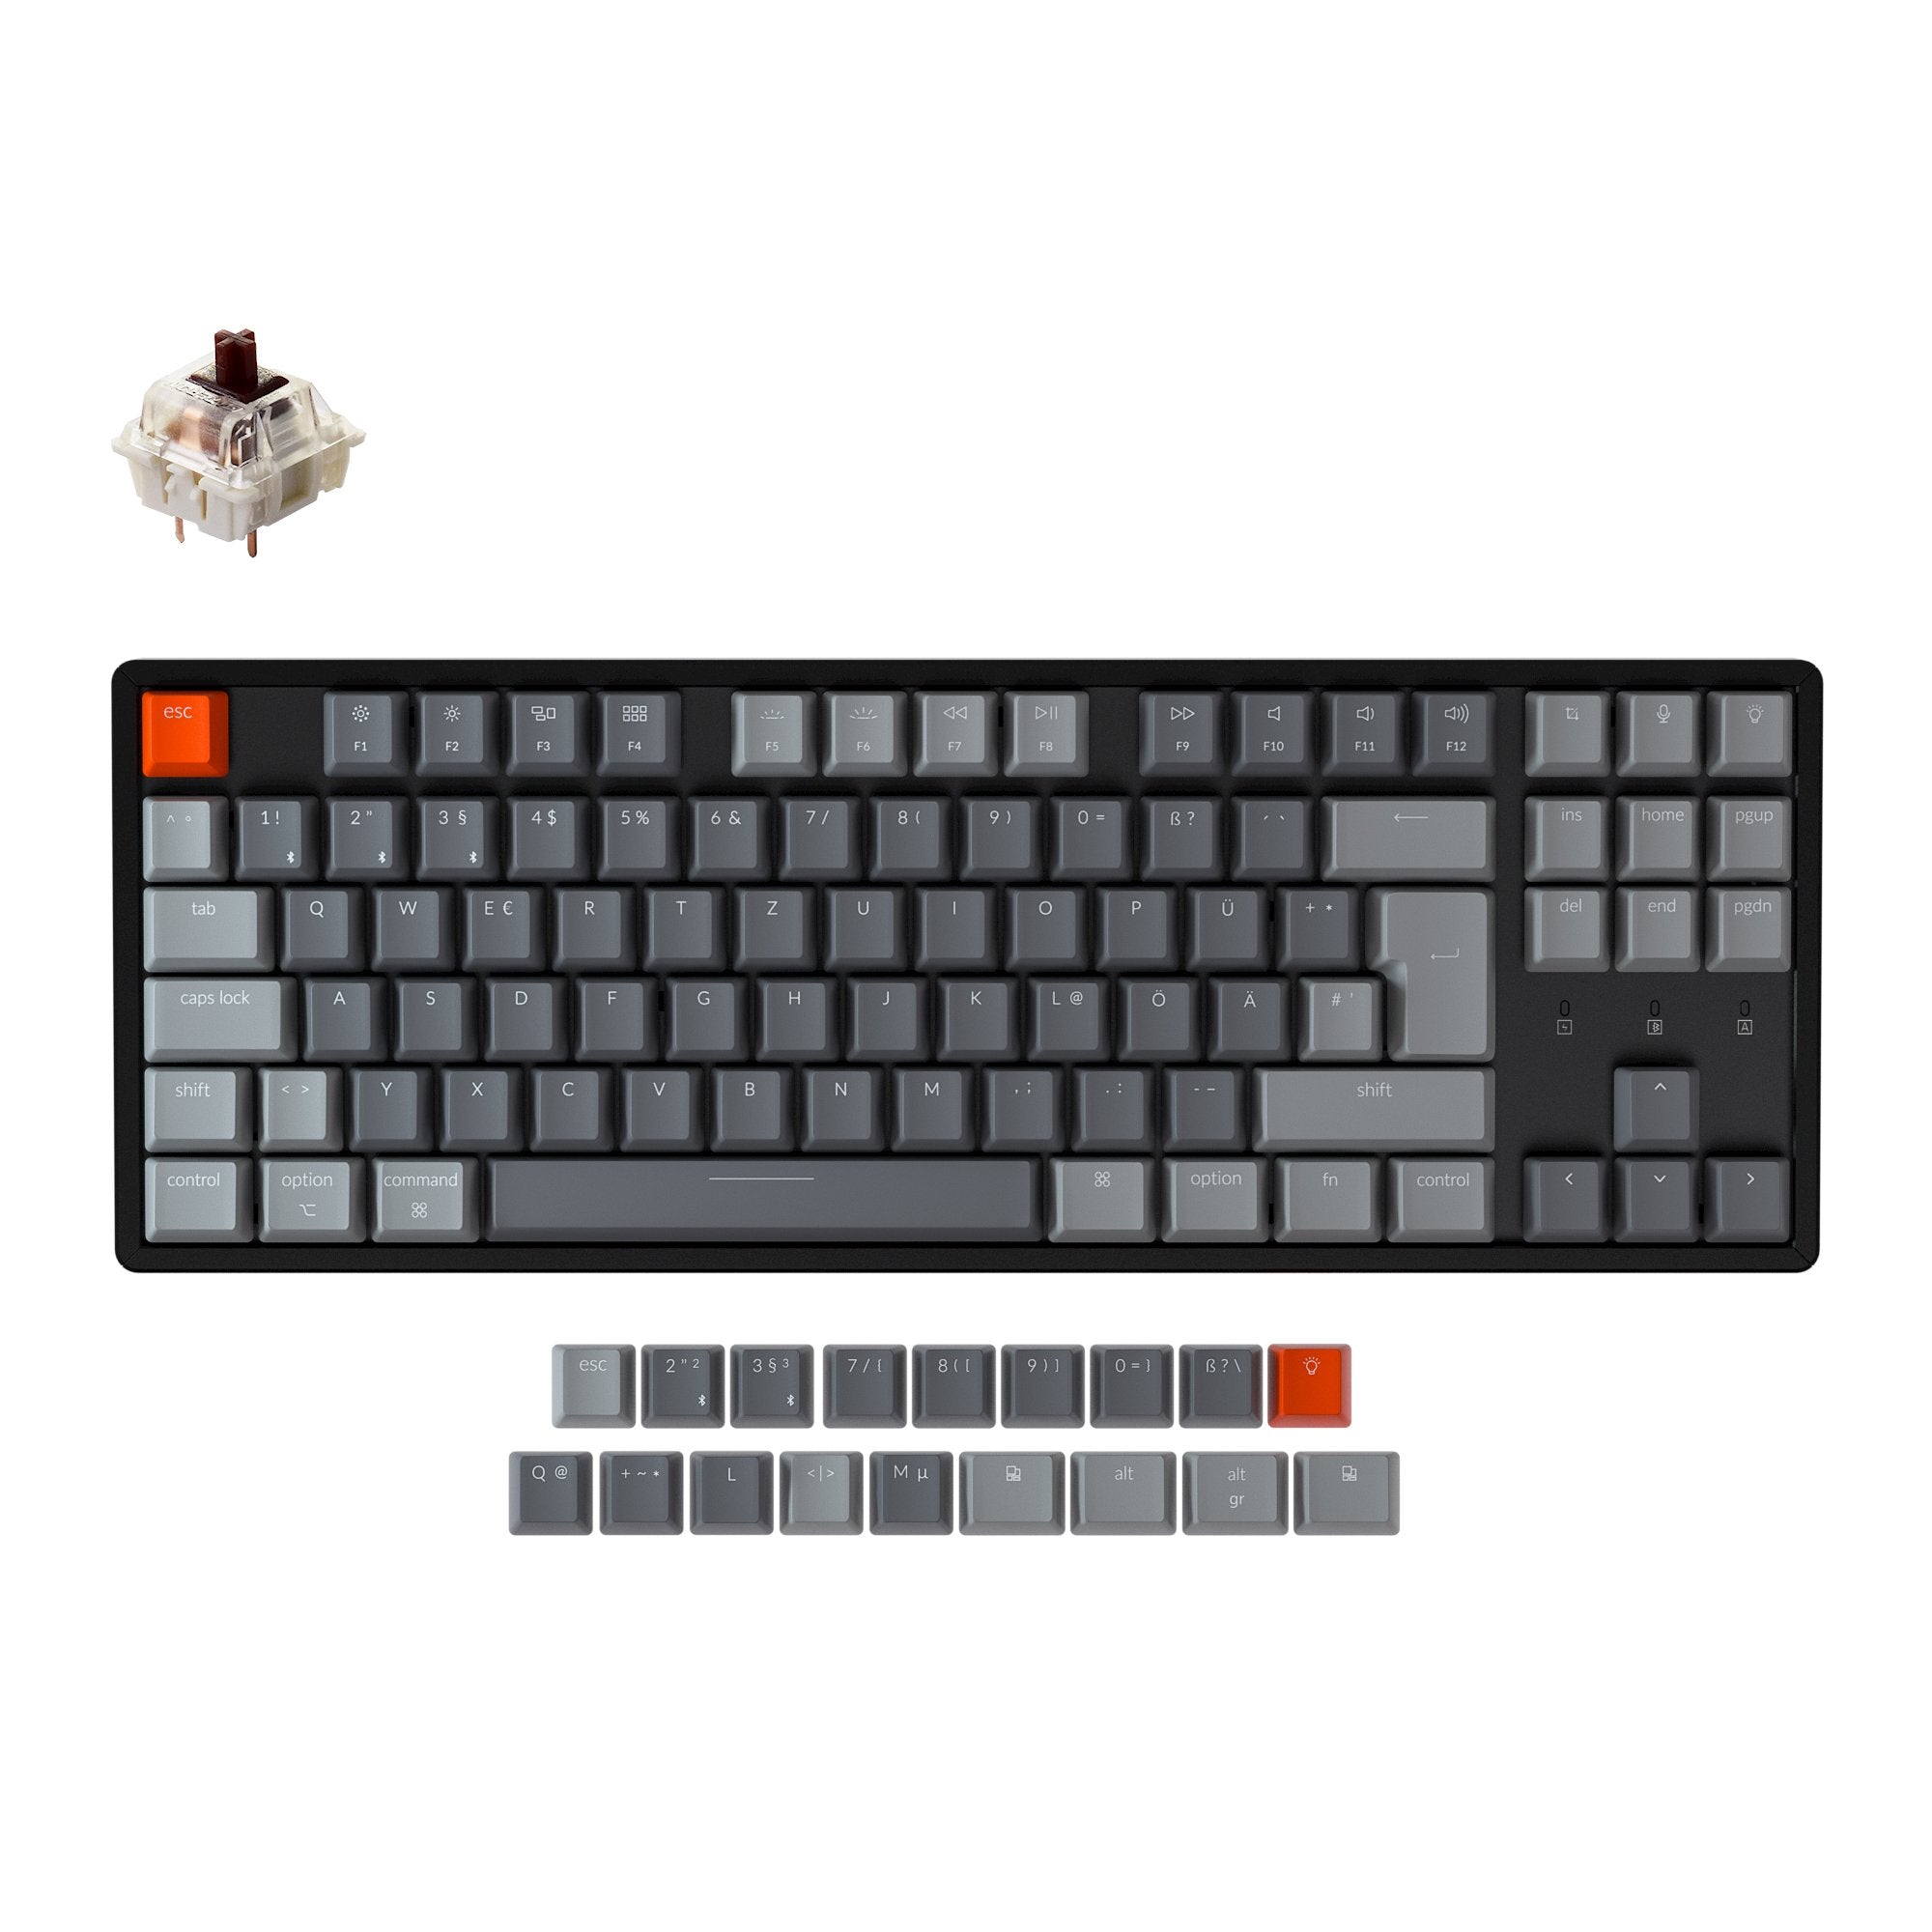 Keychron K8 Tenkeyless Wireless Mechanical Keyboard (German ISO-DE Layout) has included keycaps for both Windows and macOS, and users can hotswap every switch in seconds with the hot-swappable version.